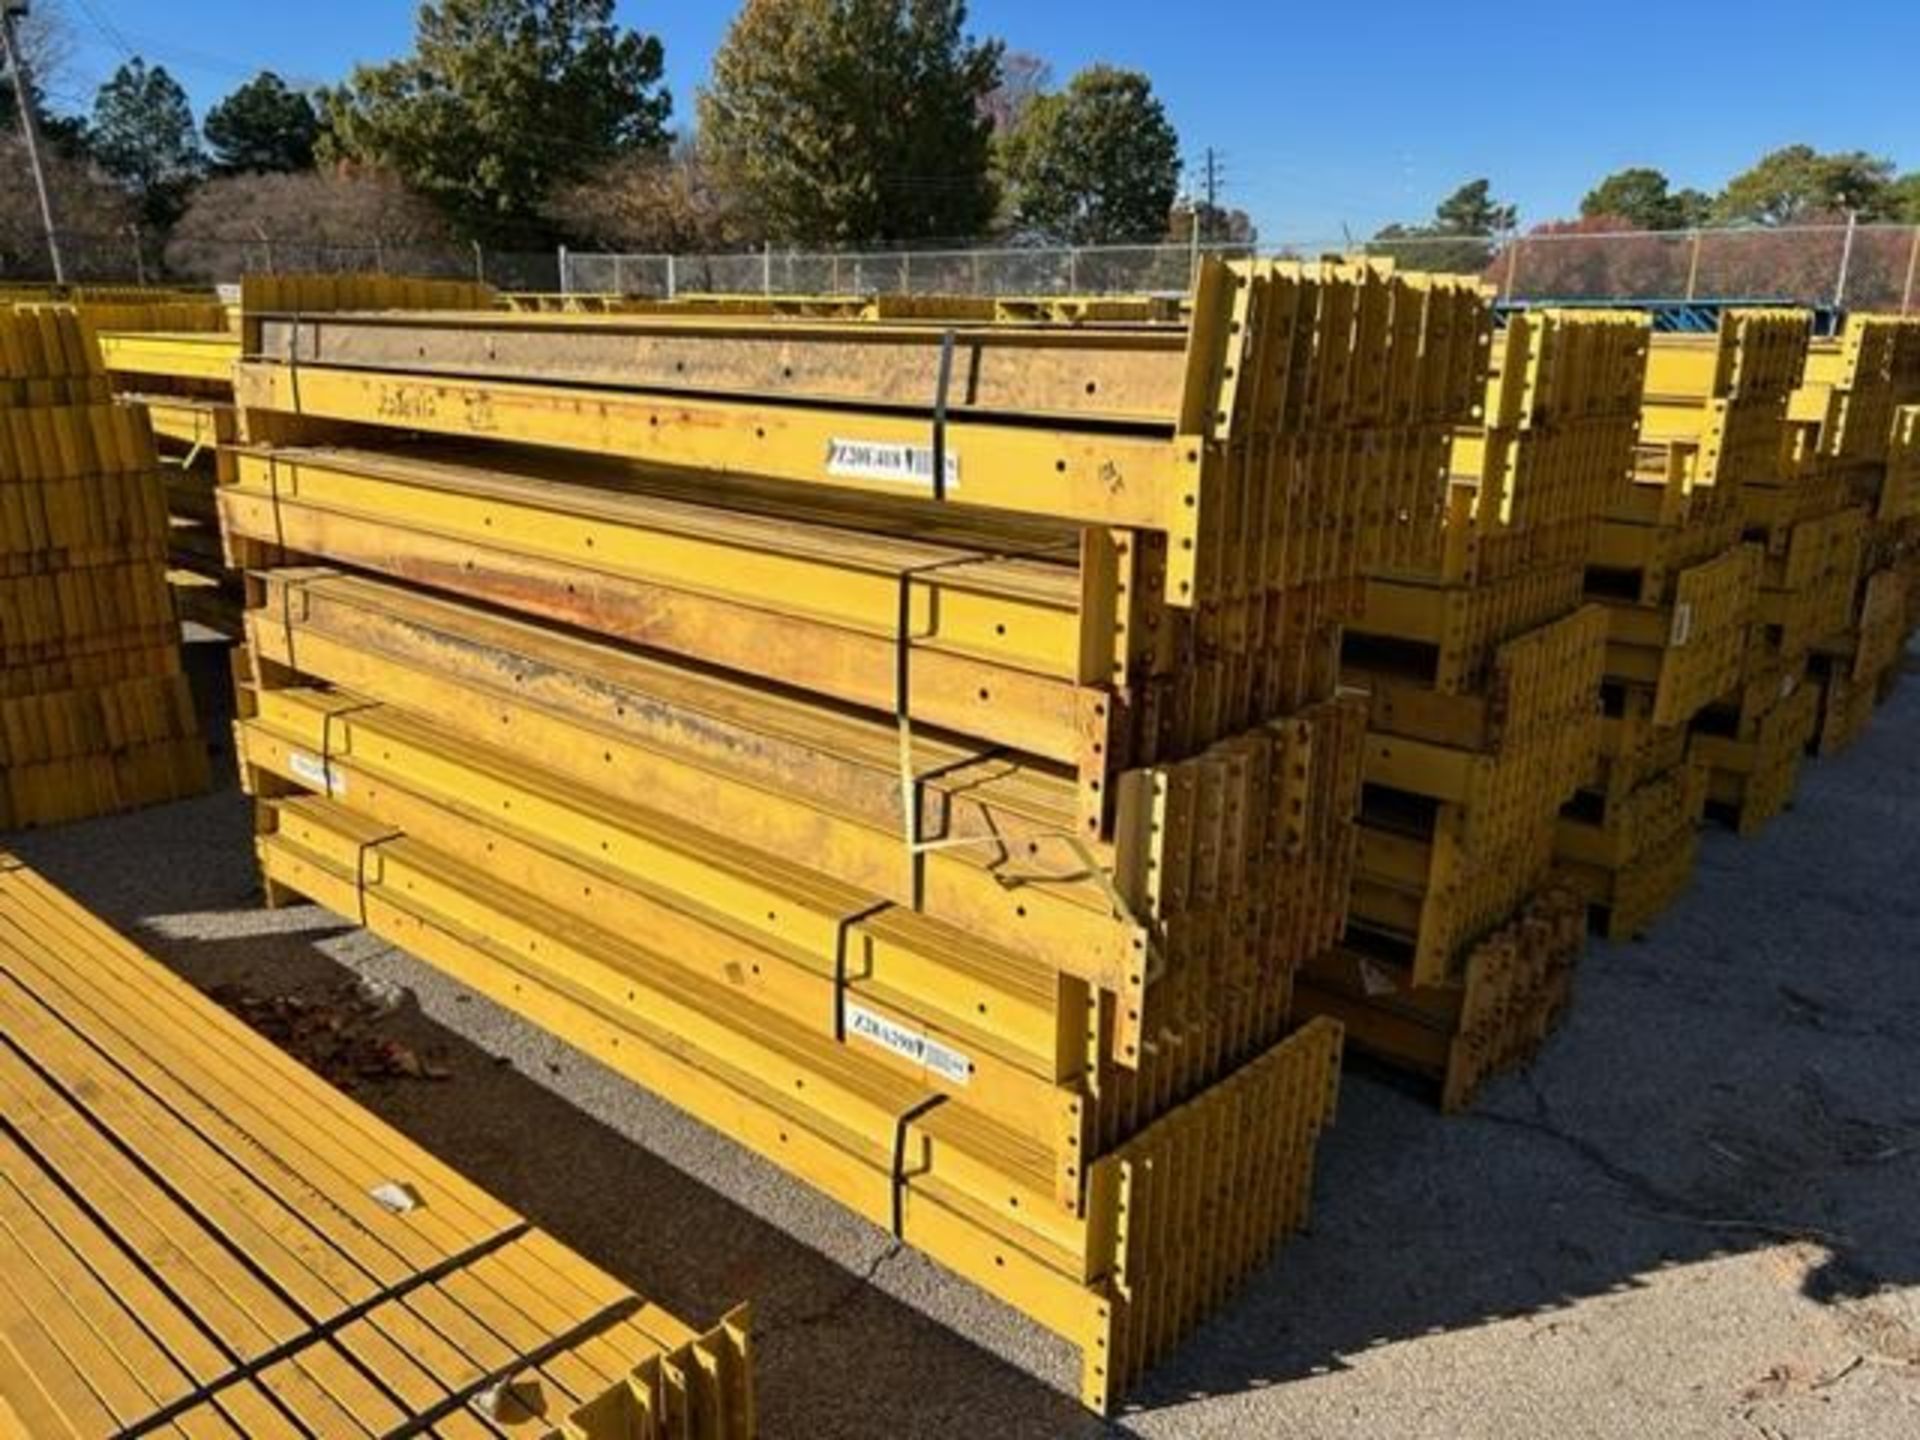 (56x) Bolt Together C-Channel Beams, 108"x4" ($25 Loading Fee Will Be Added to Buyers Invoice) - Image 5 of 10